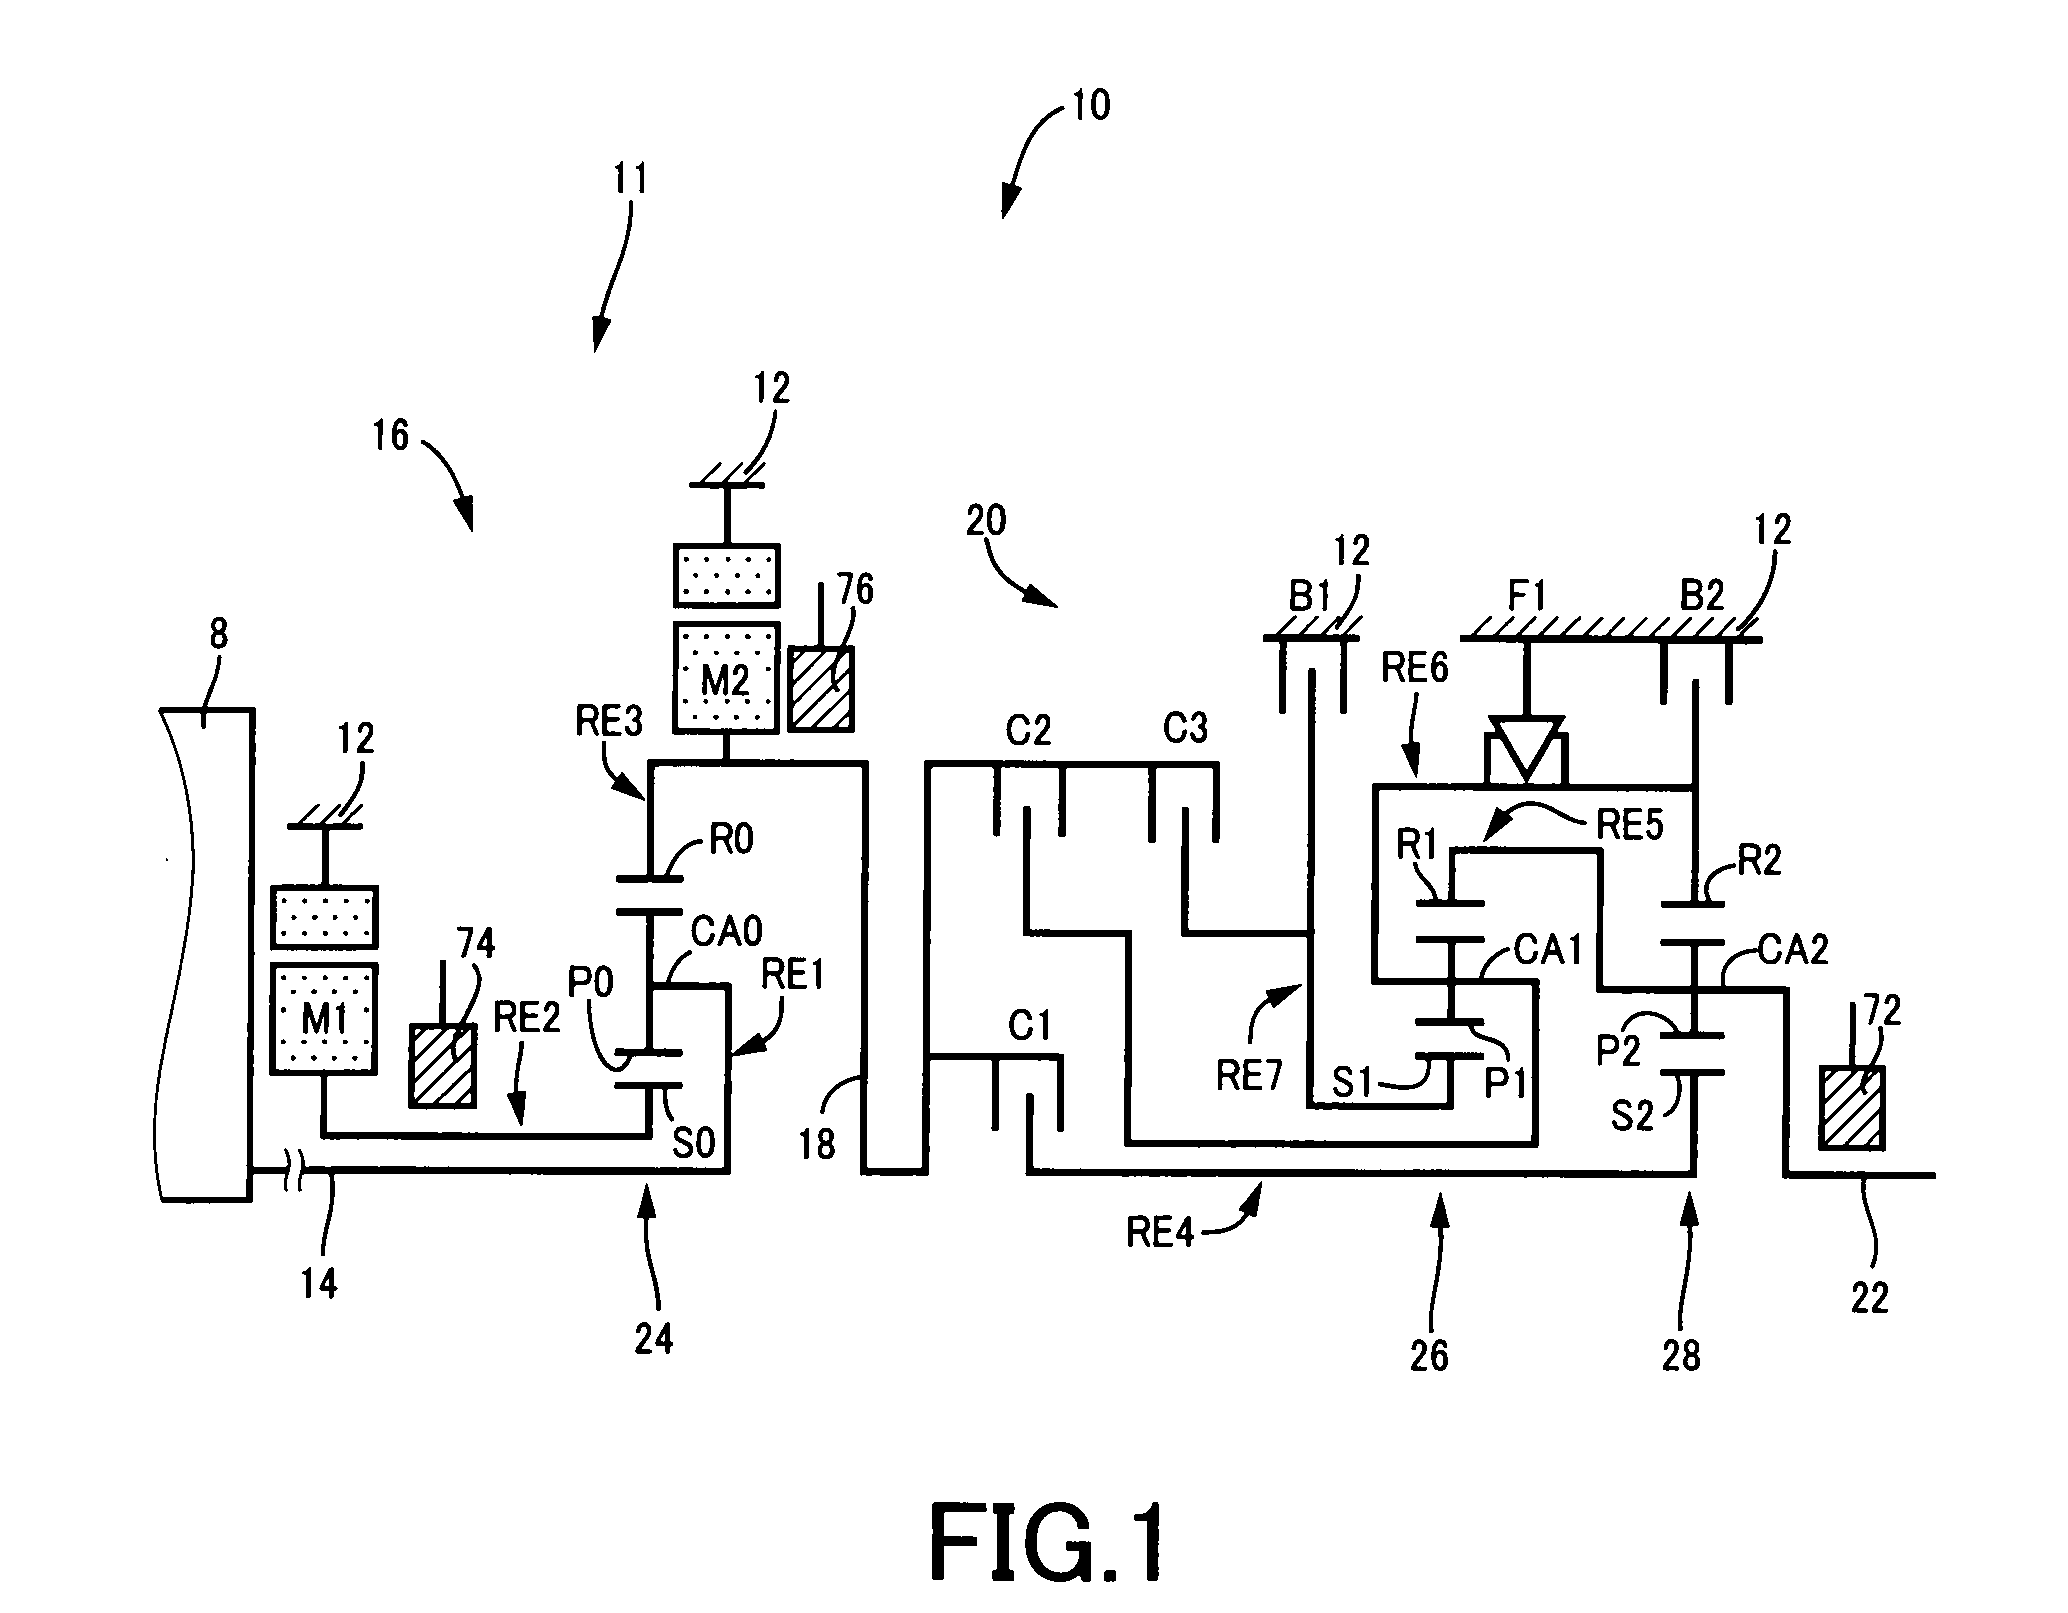 Control apparatus for vehicular power transmitting system